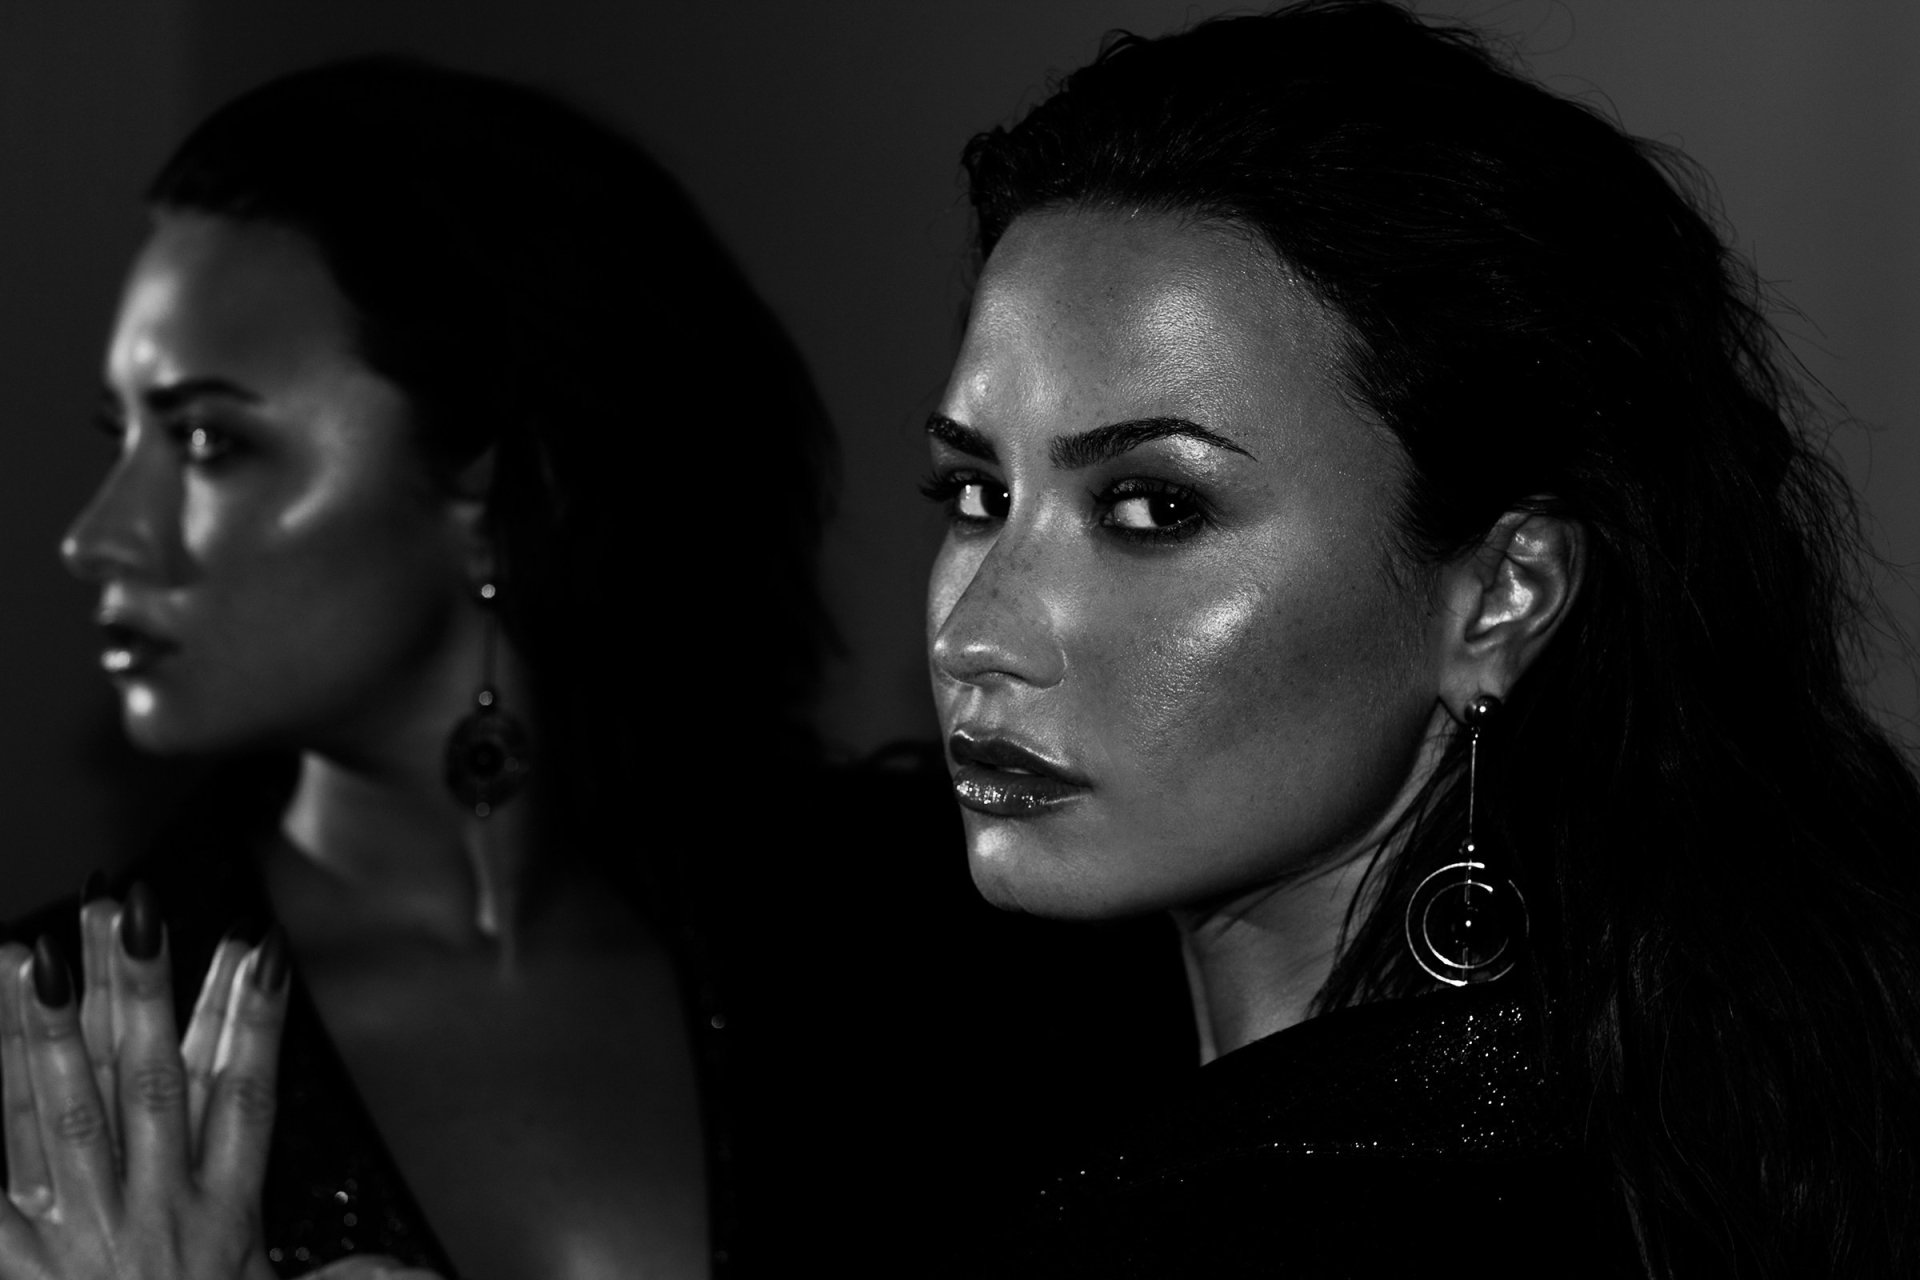 Download Lipstick Earrings Singer American Face Black And White Reflection Music Demi Lovato Hd 5446